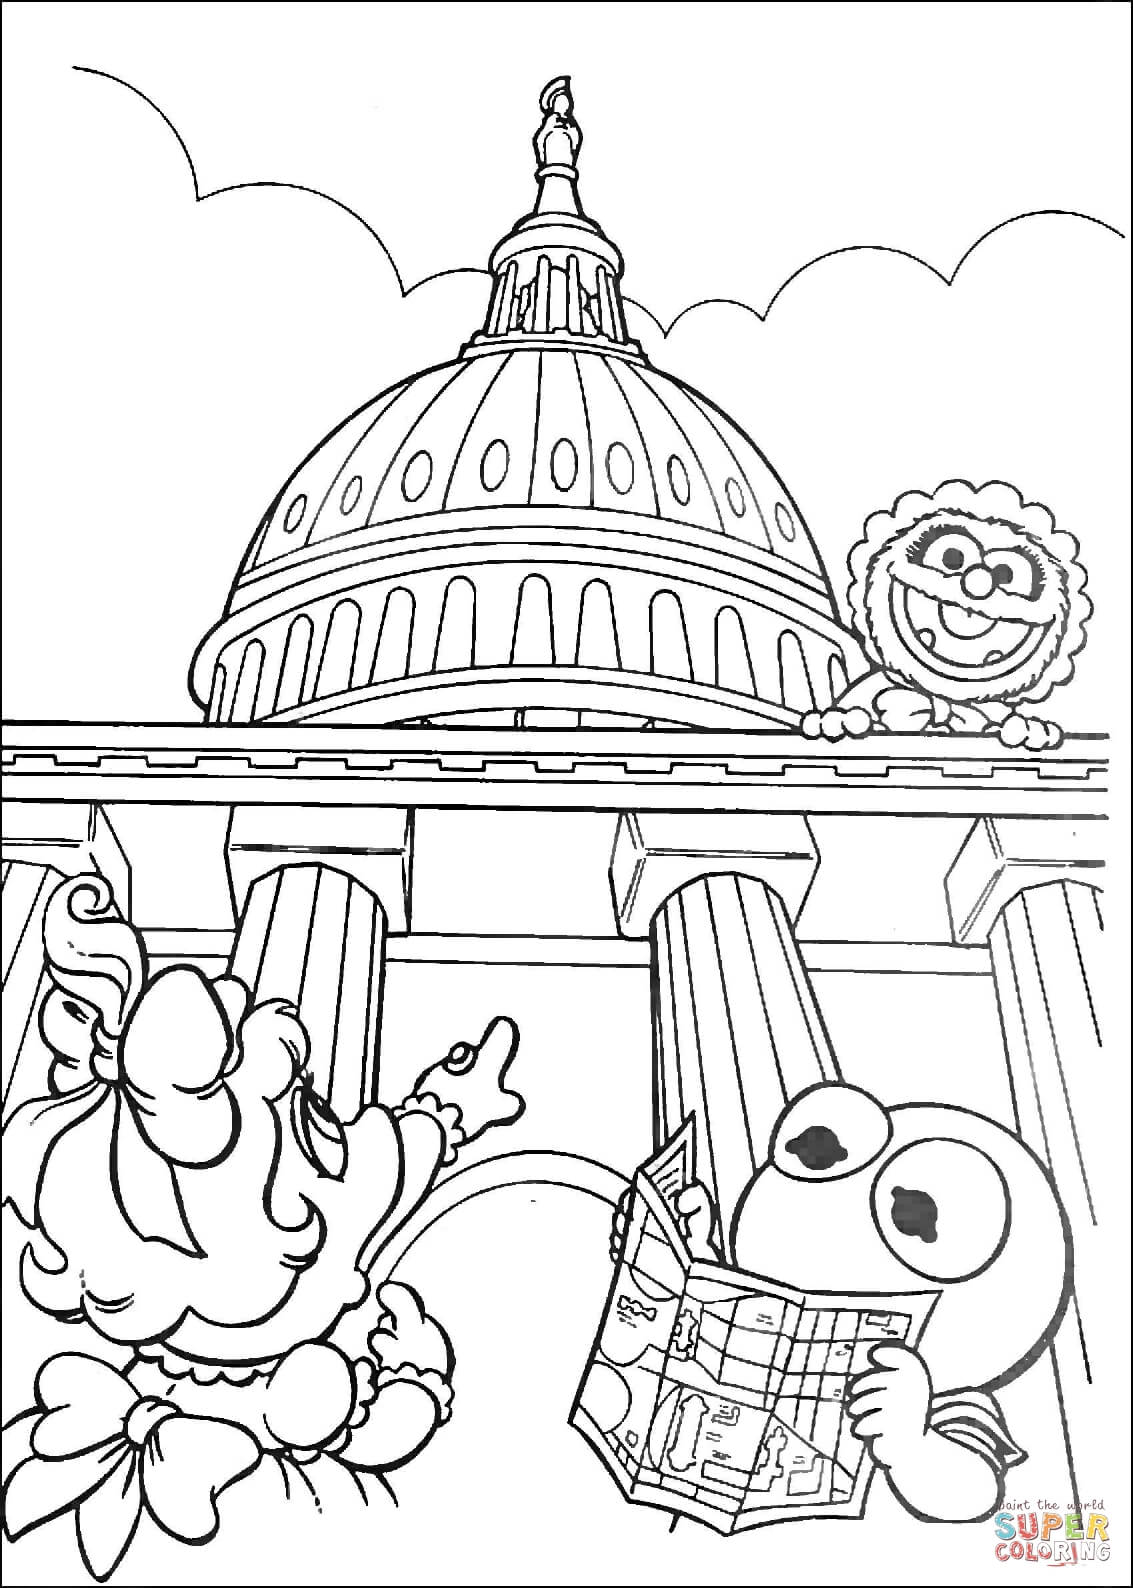 Muppet Babies in Washington D.C. coloring page | Free Printable ...